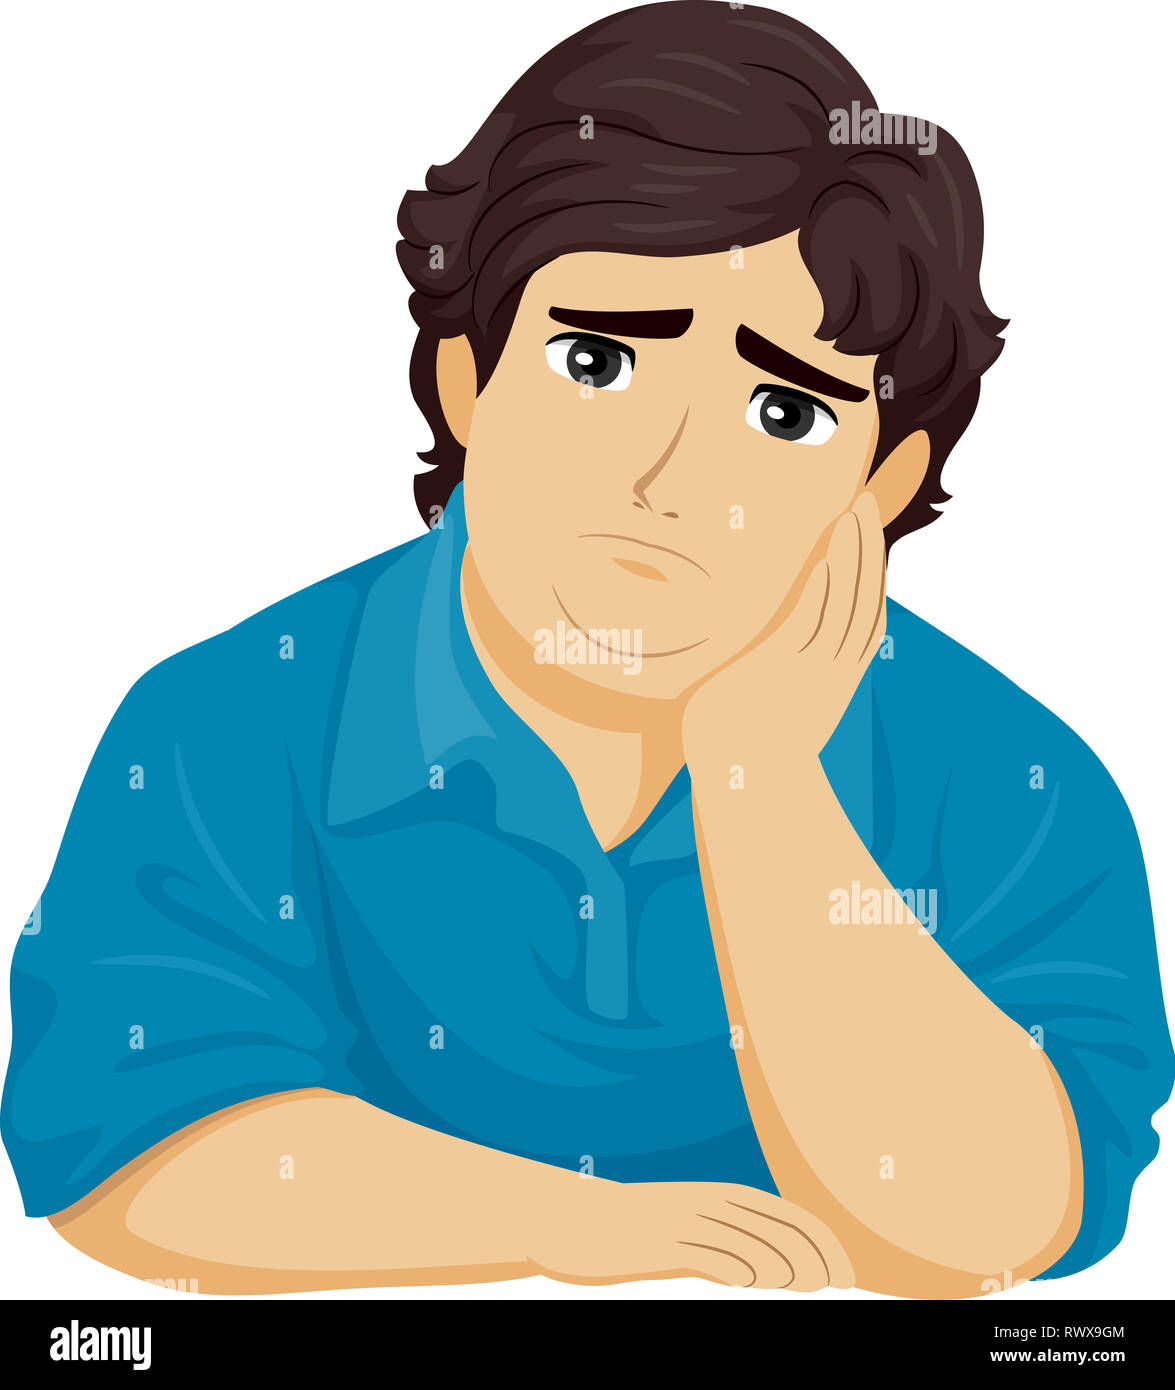 Illustration of a Fat Teenage Guy with Hand on Face Feeling Sad or ...